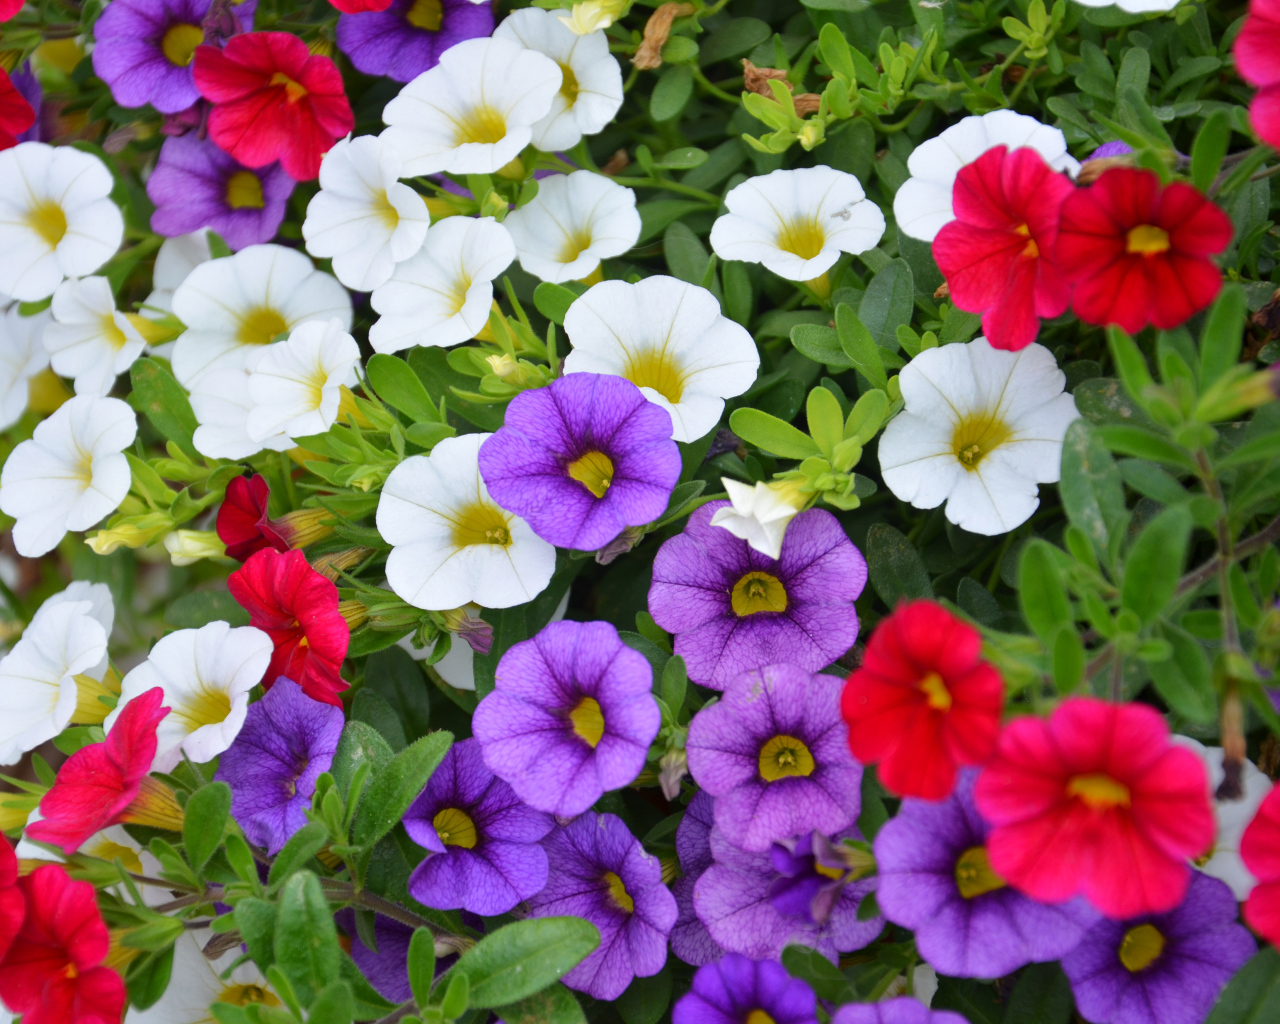 Multicolored flowers of Calibraro on the flowerbed